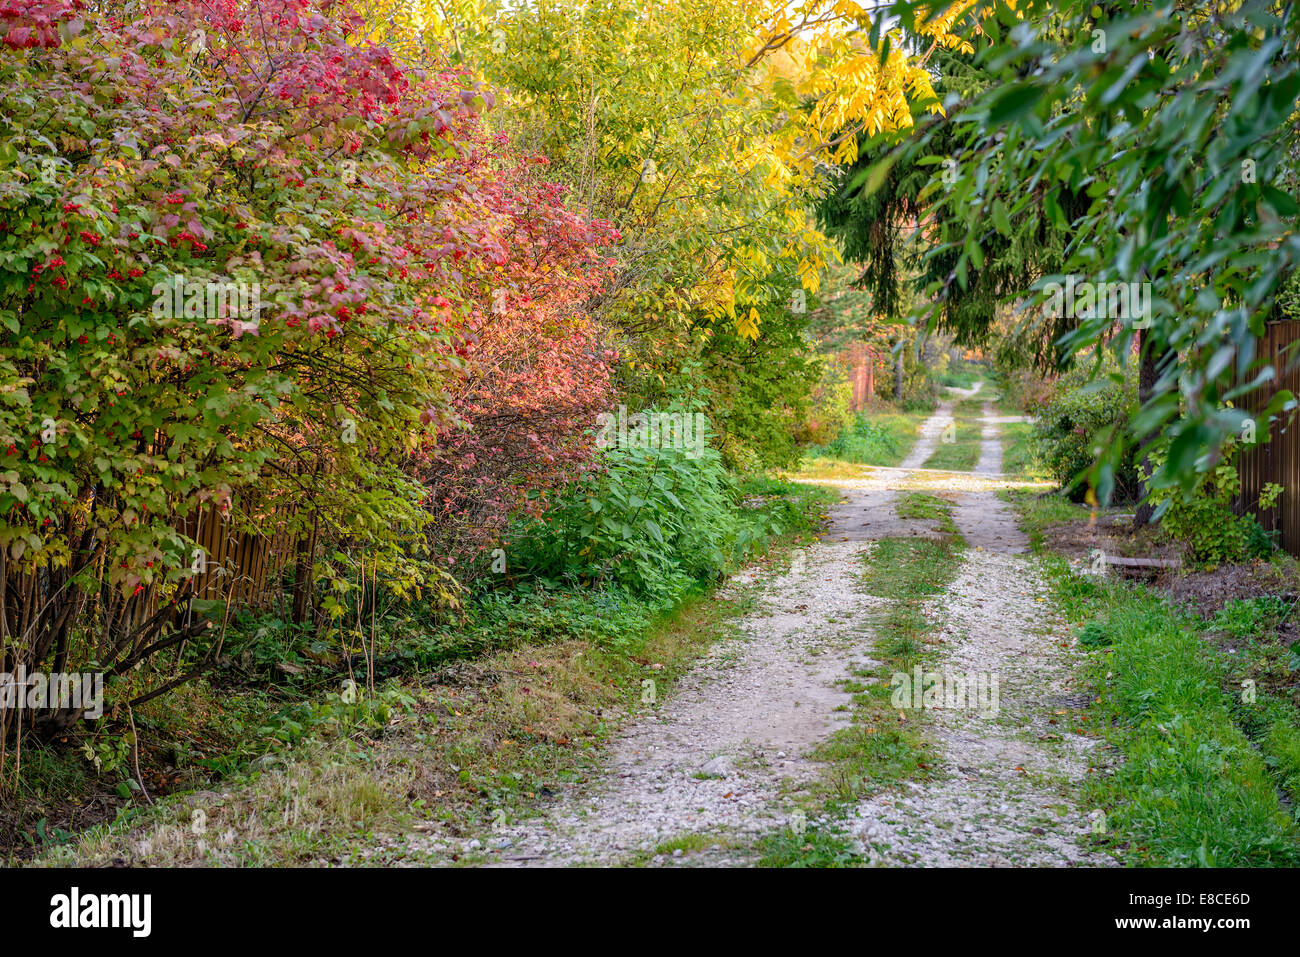 Colorful autumn landscape on country road Stock Photo